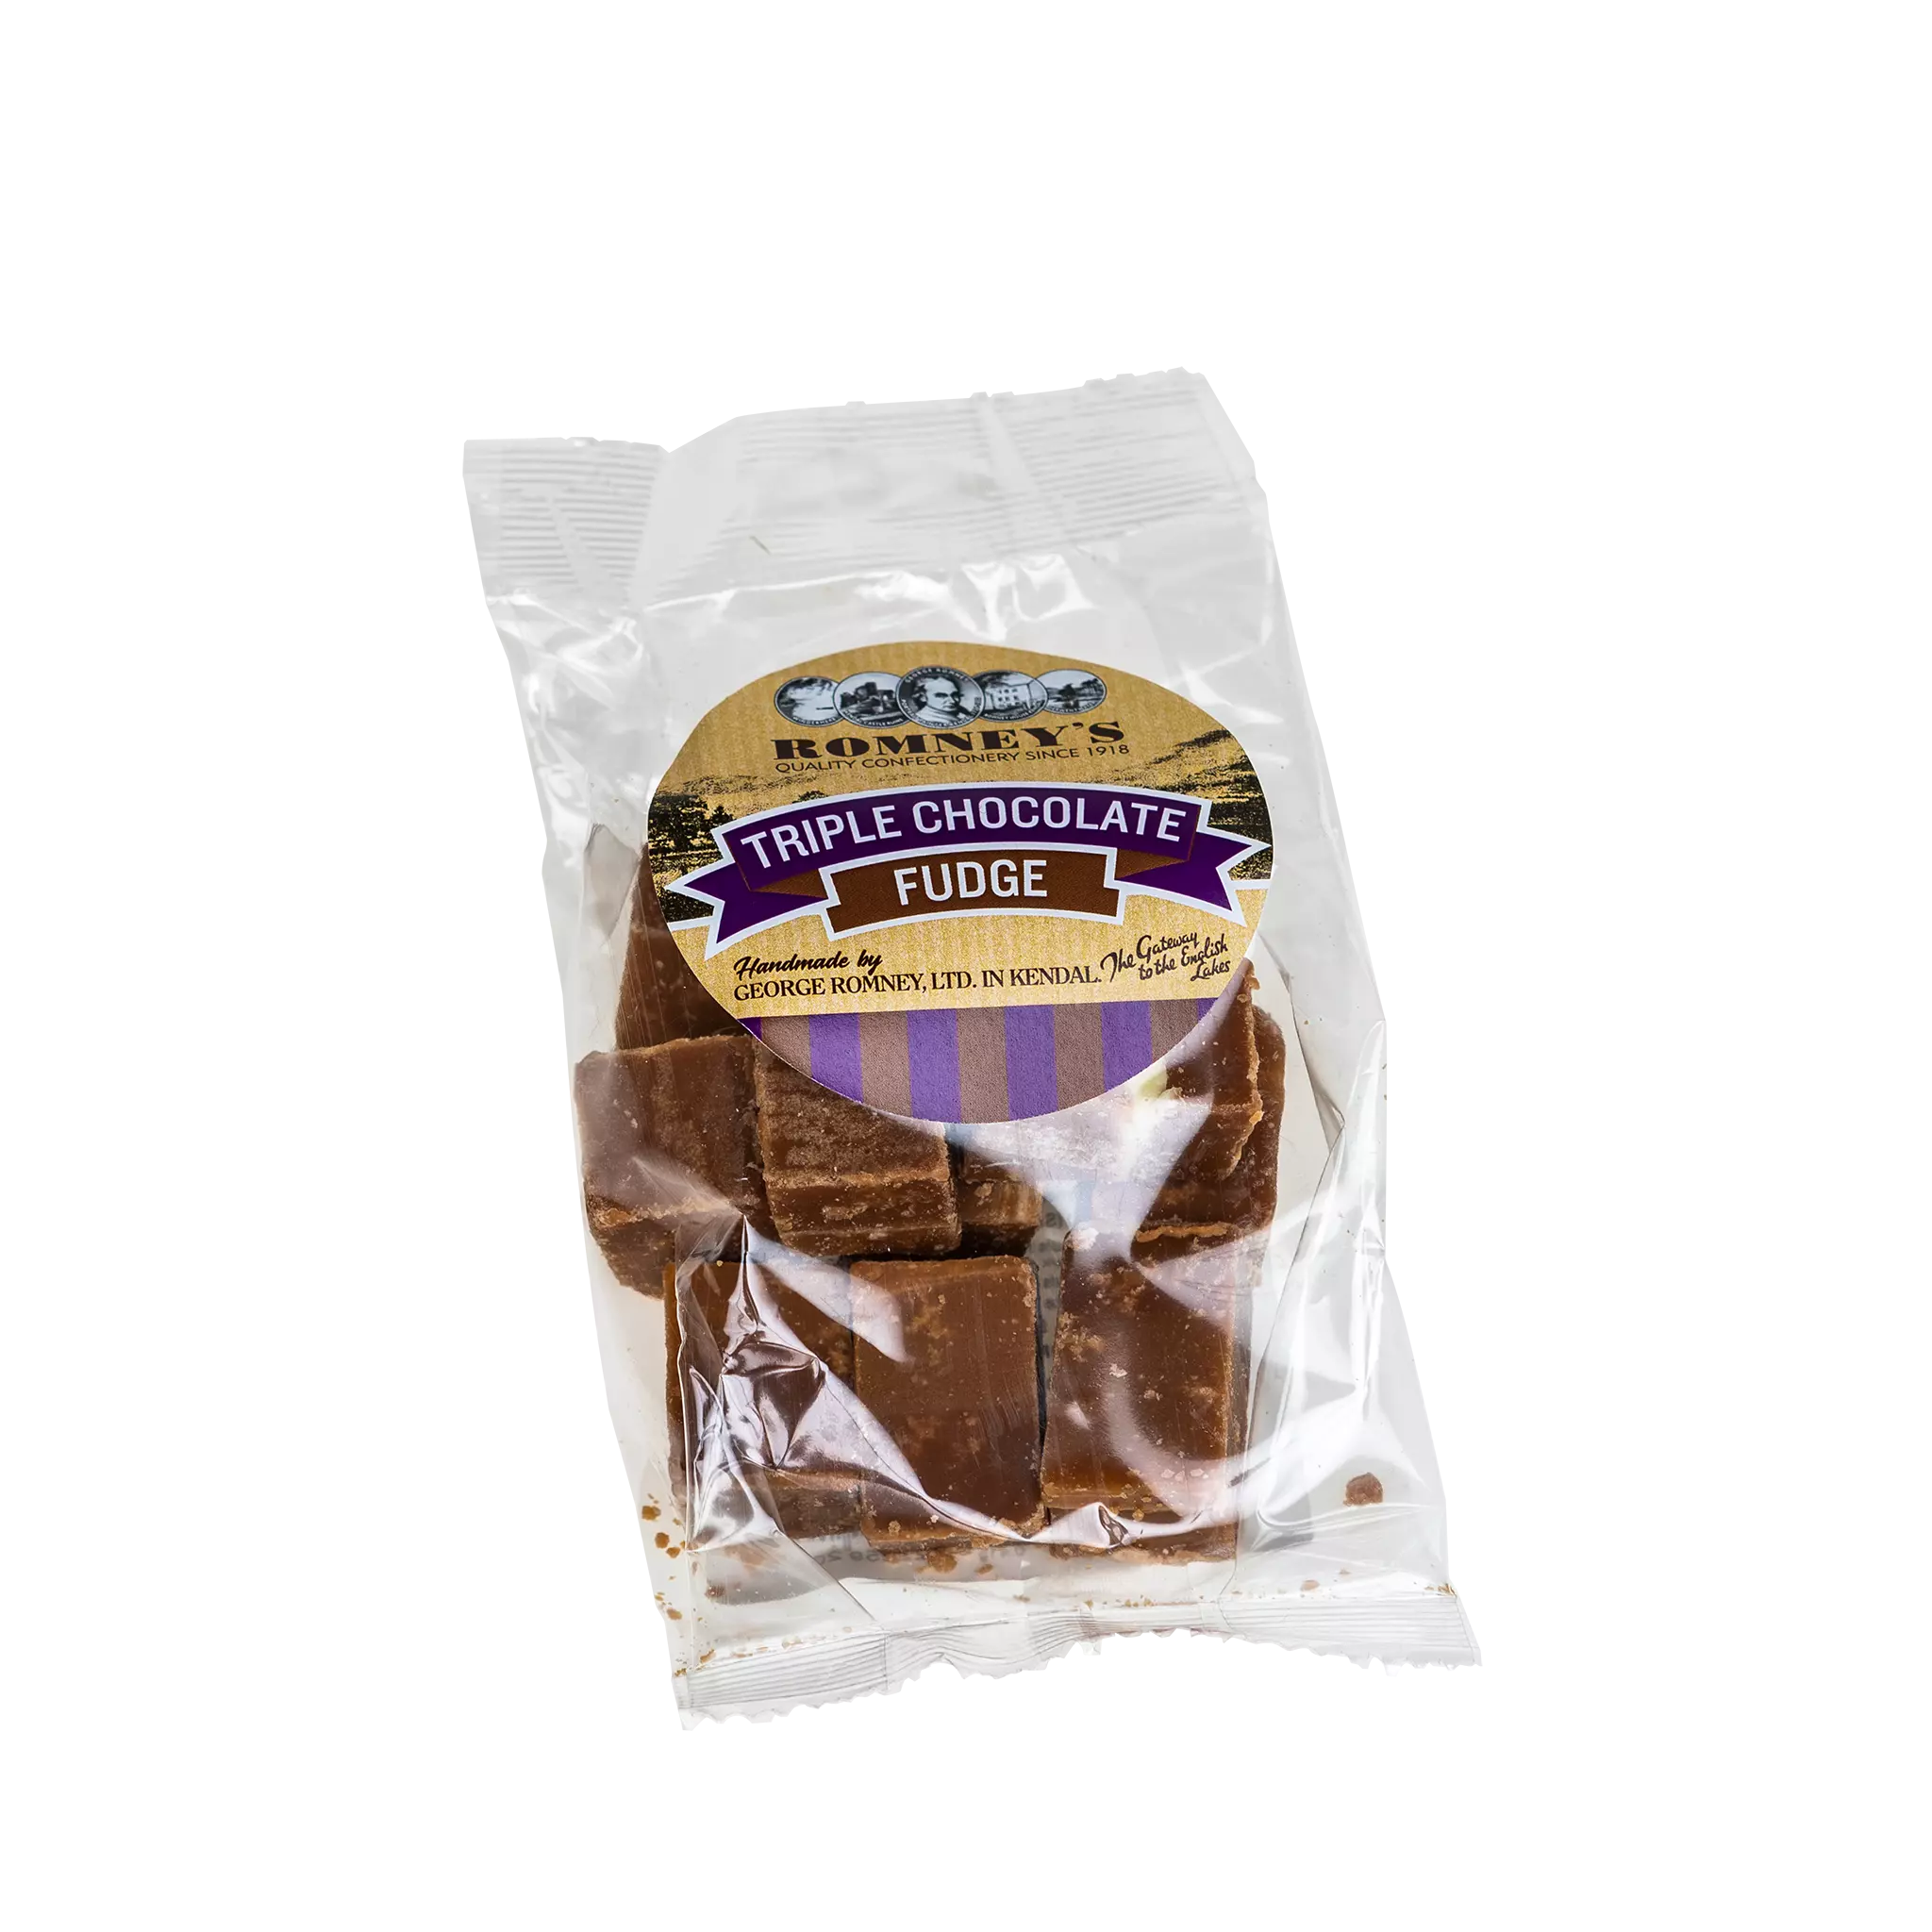 A transparent bag containing pieces of Fudge. The bag has a label on it that shows Romney's logo and says 'Triple Chocolate Fudge'.